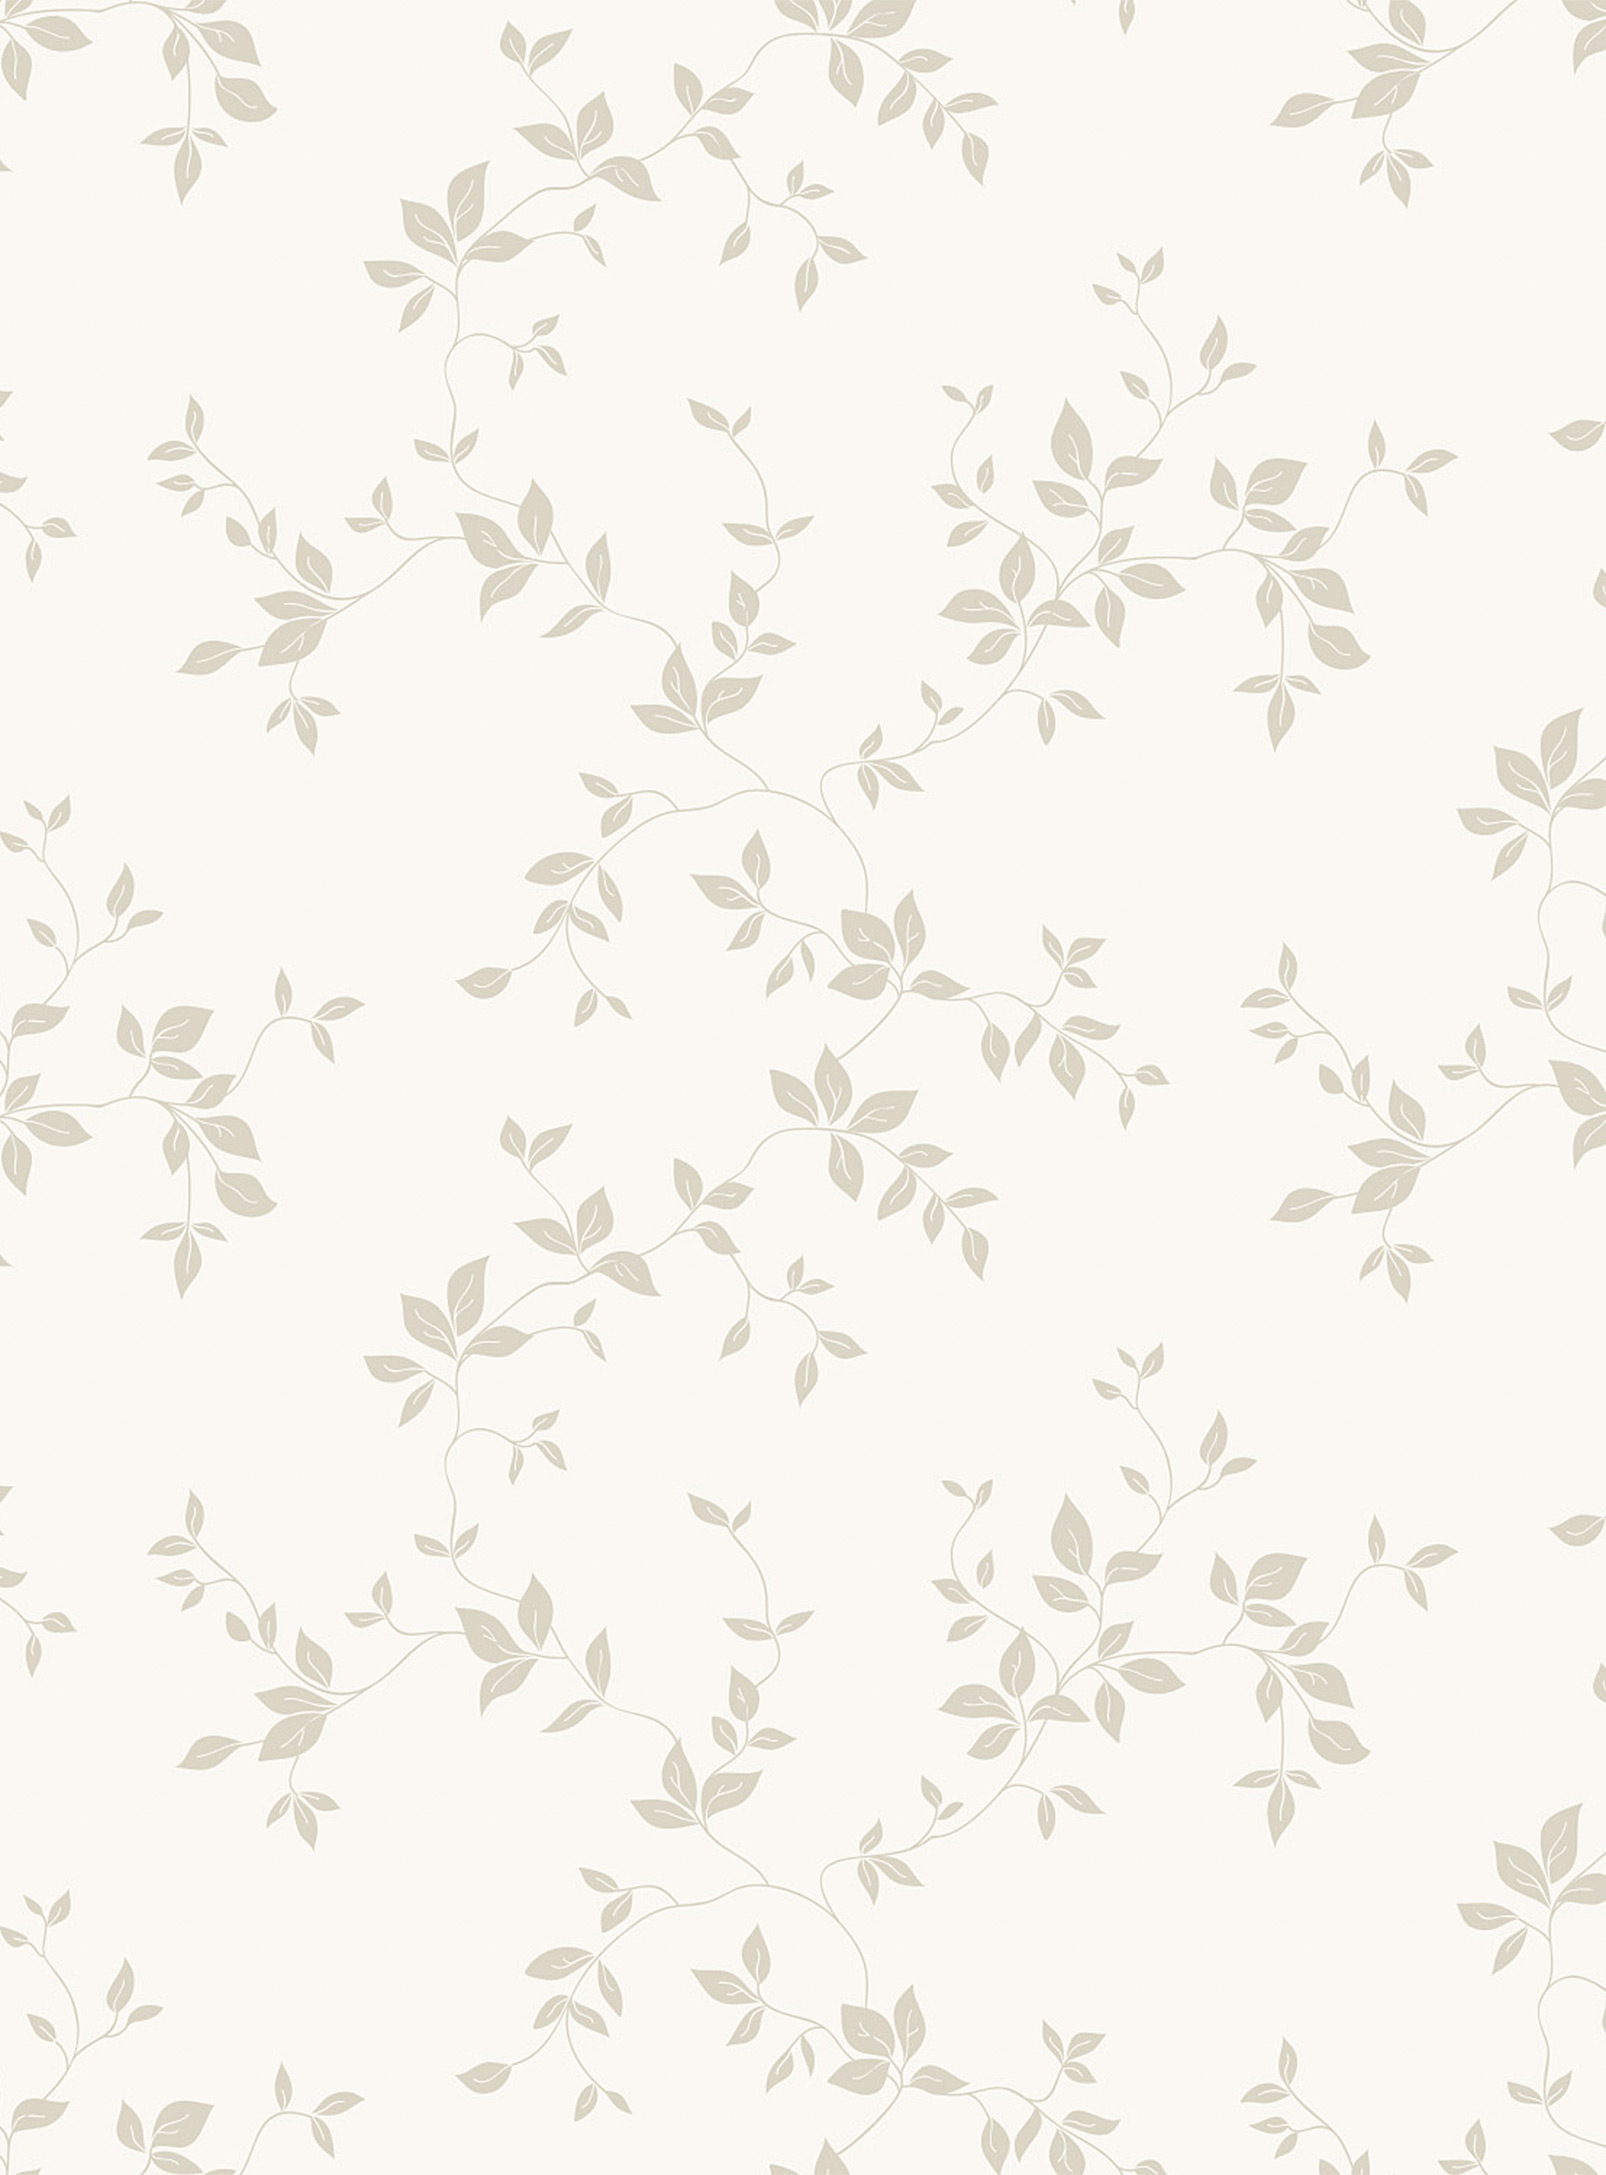 Station D Rosane Flowery Wallpaper Strip See Available Sizes In Cream Beige